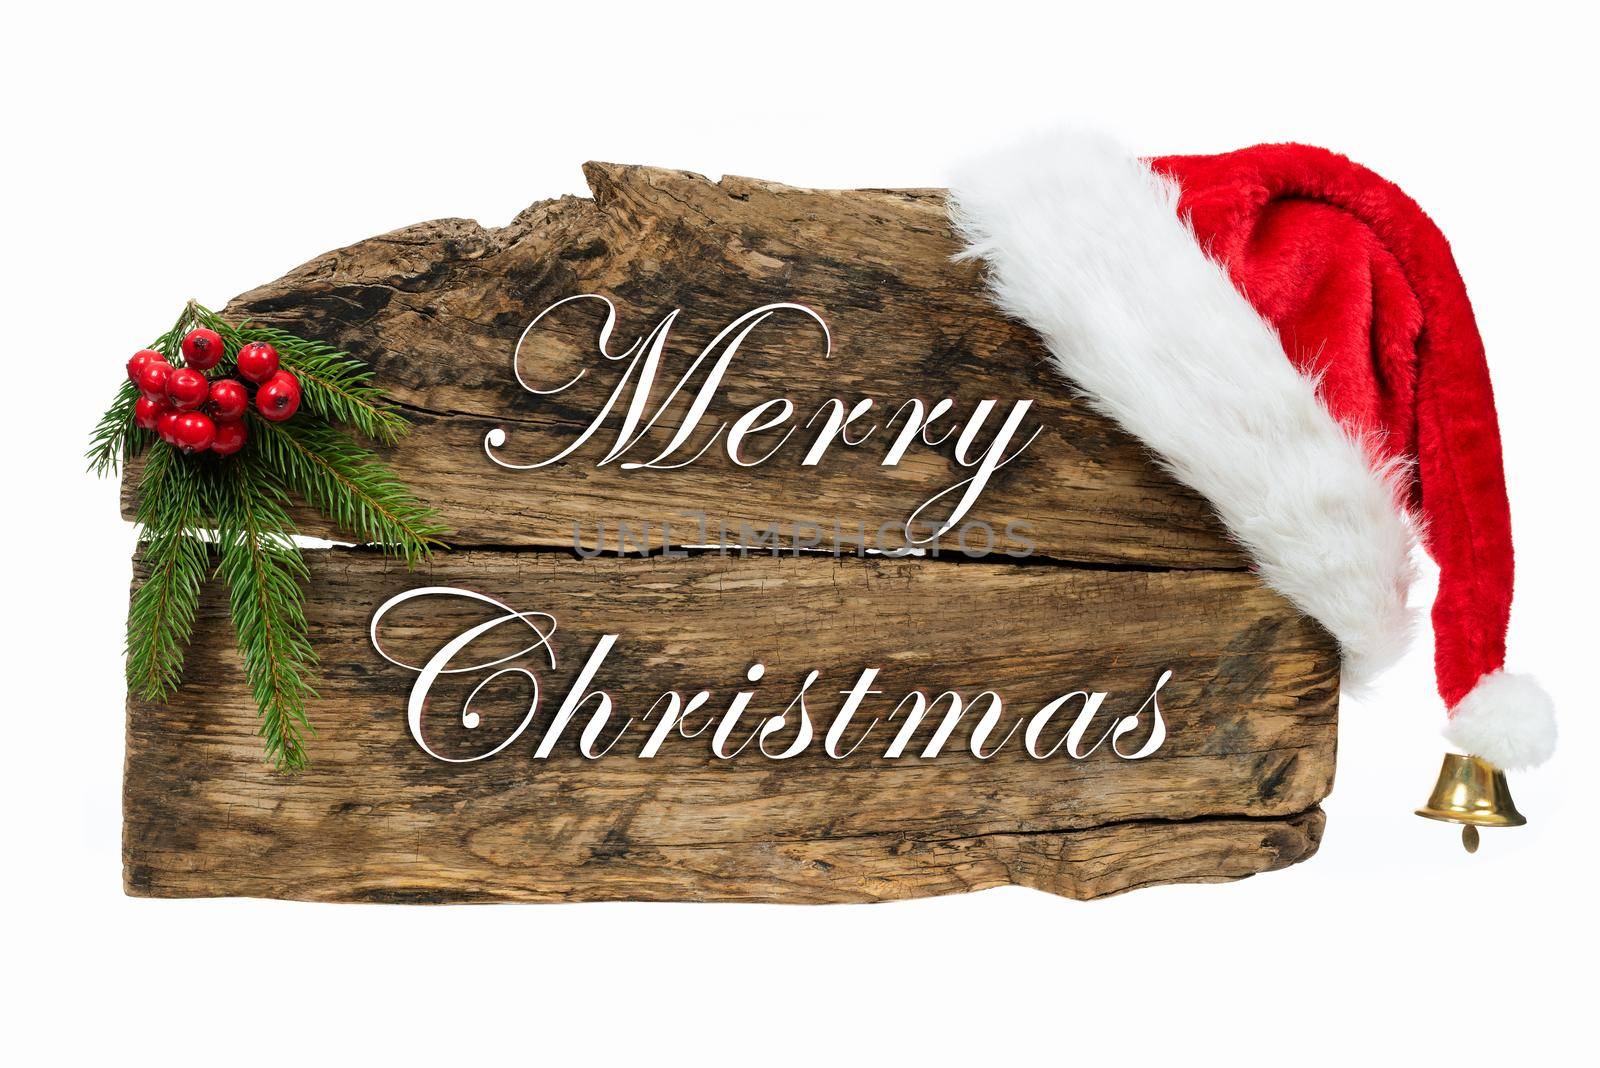 Christmas wooden board sign by wdnet_studio